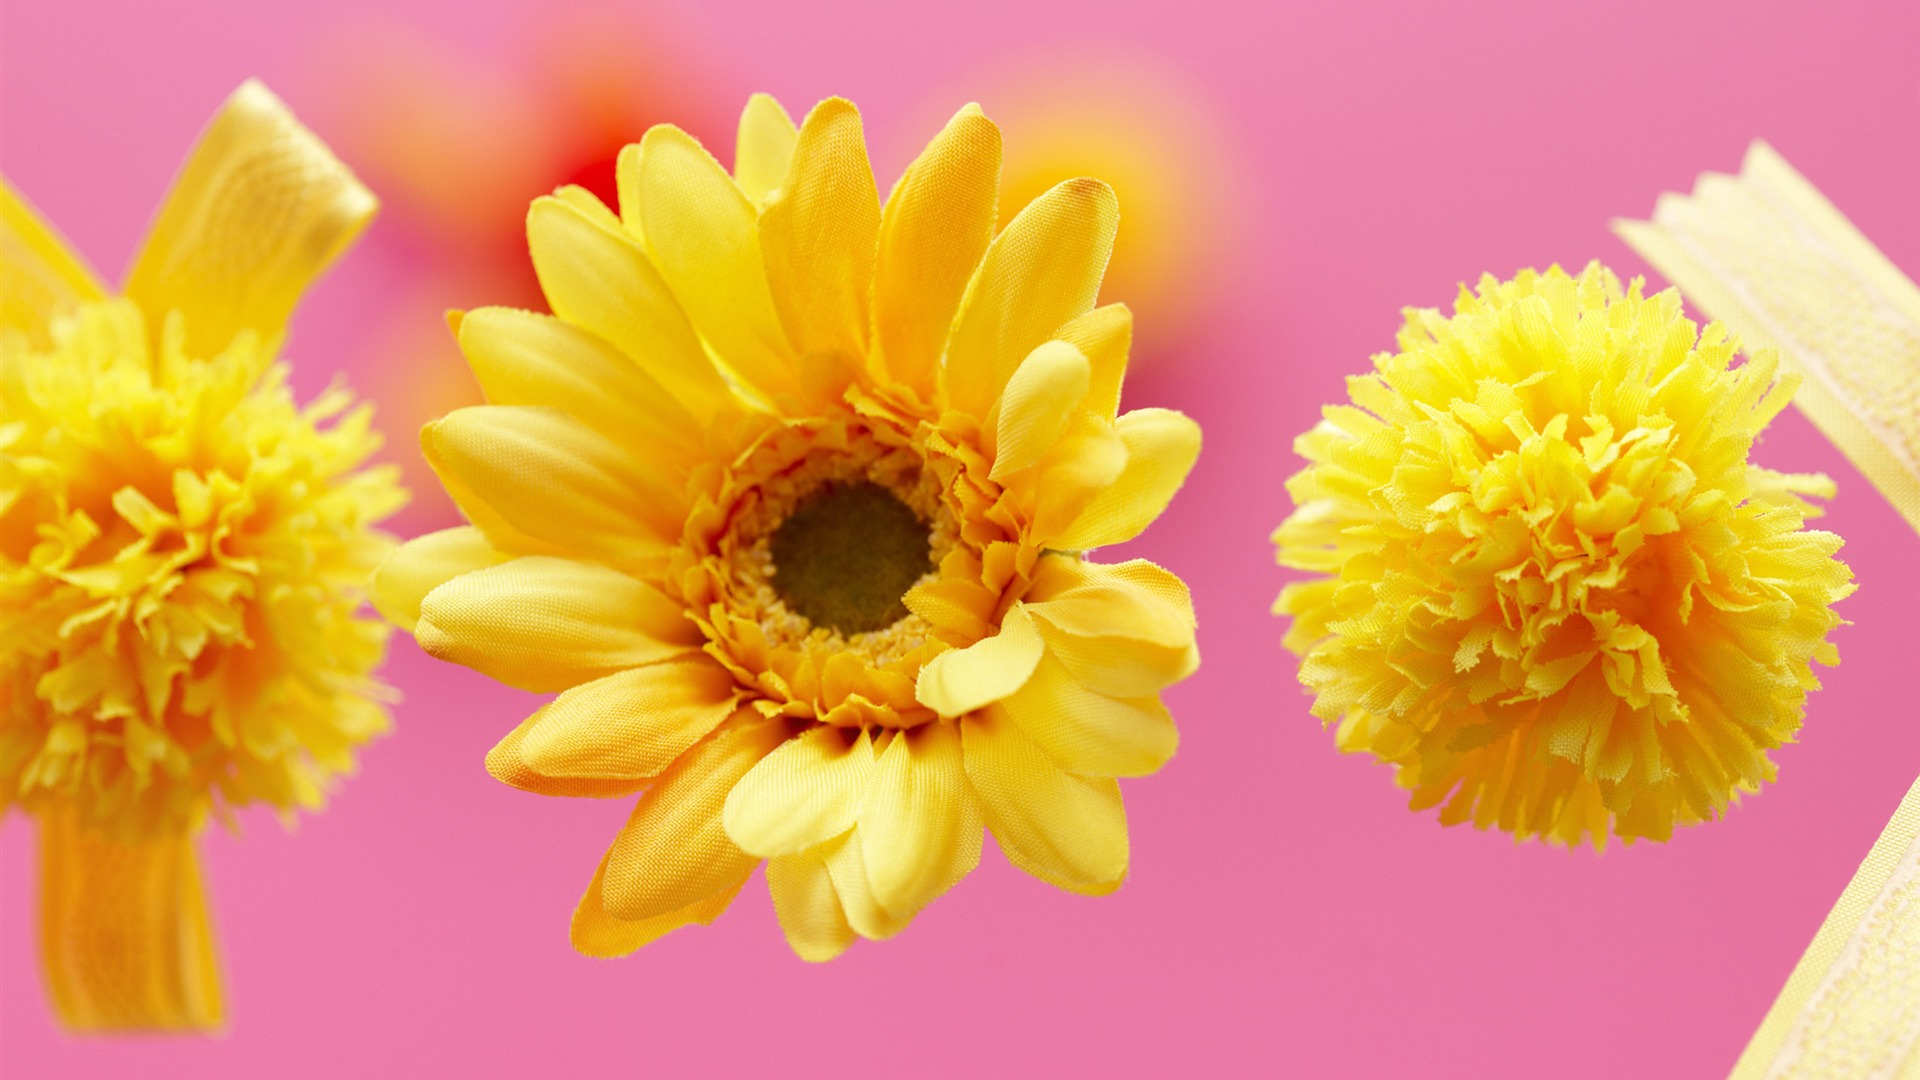 Flowers Gifts HD Wallpapers (2) #15 - 1920x1080